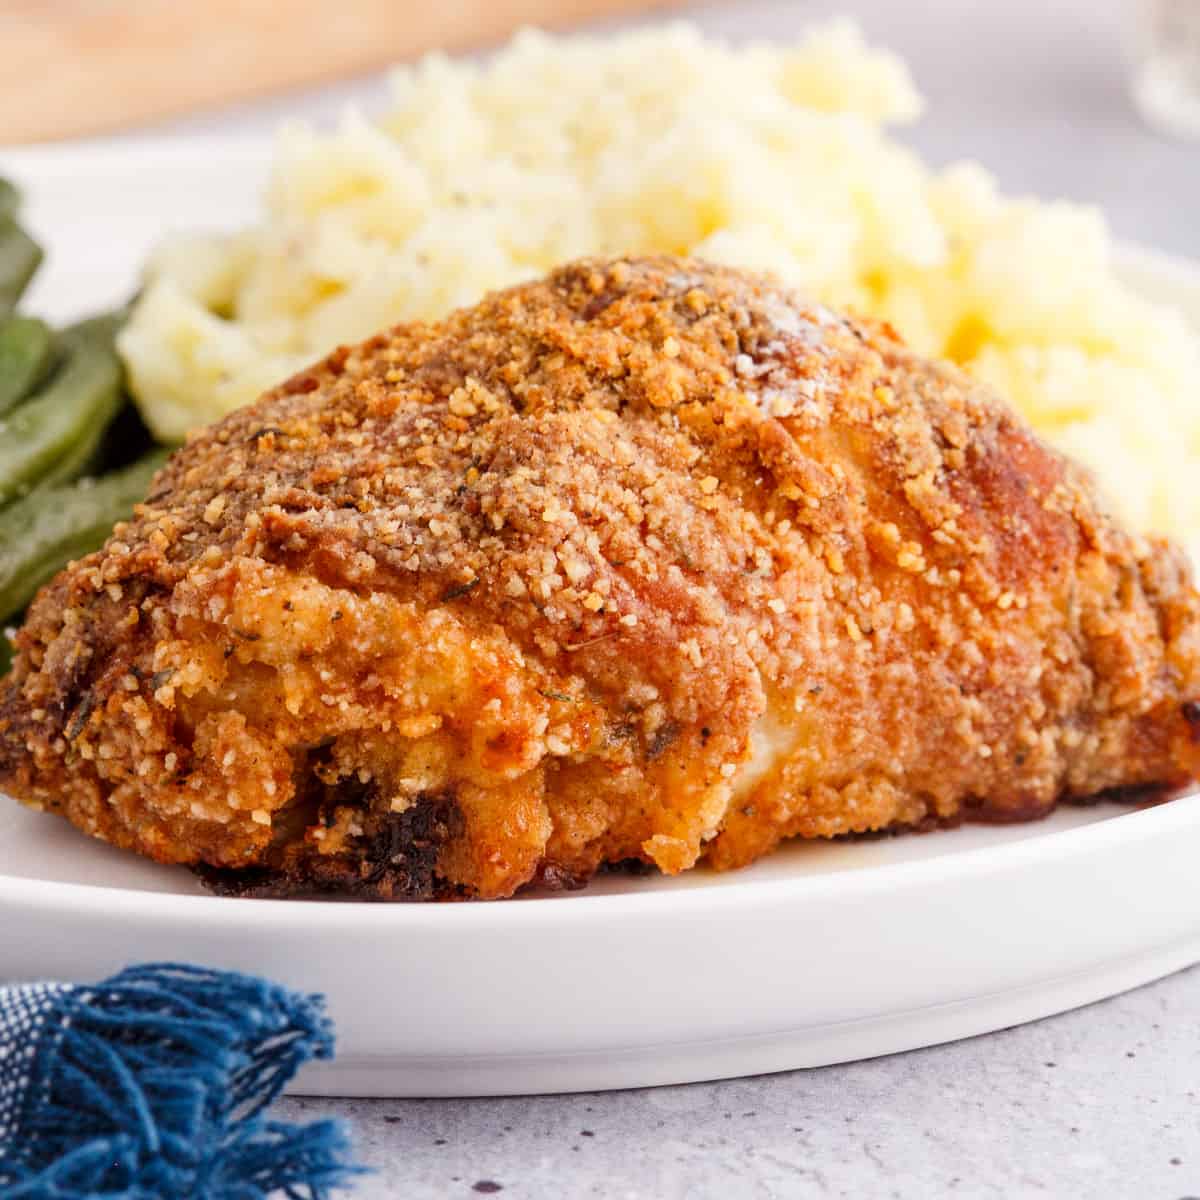 https://realhousemoms.com/wp-content/uploads/Southern-Oven-Fried-Chicken-RECIPE-CARD.jpg